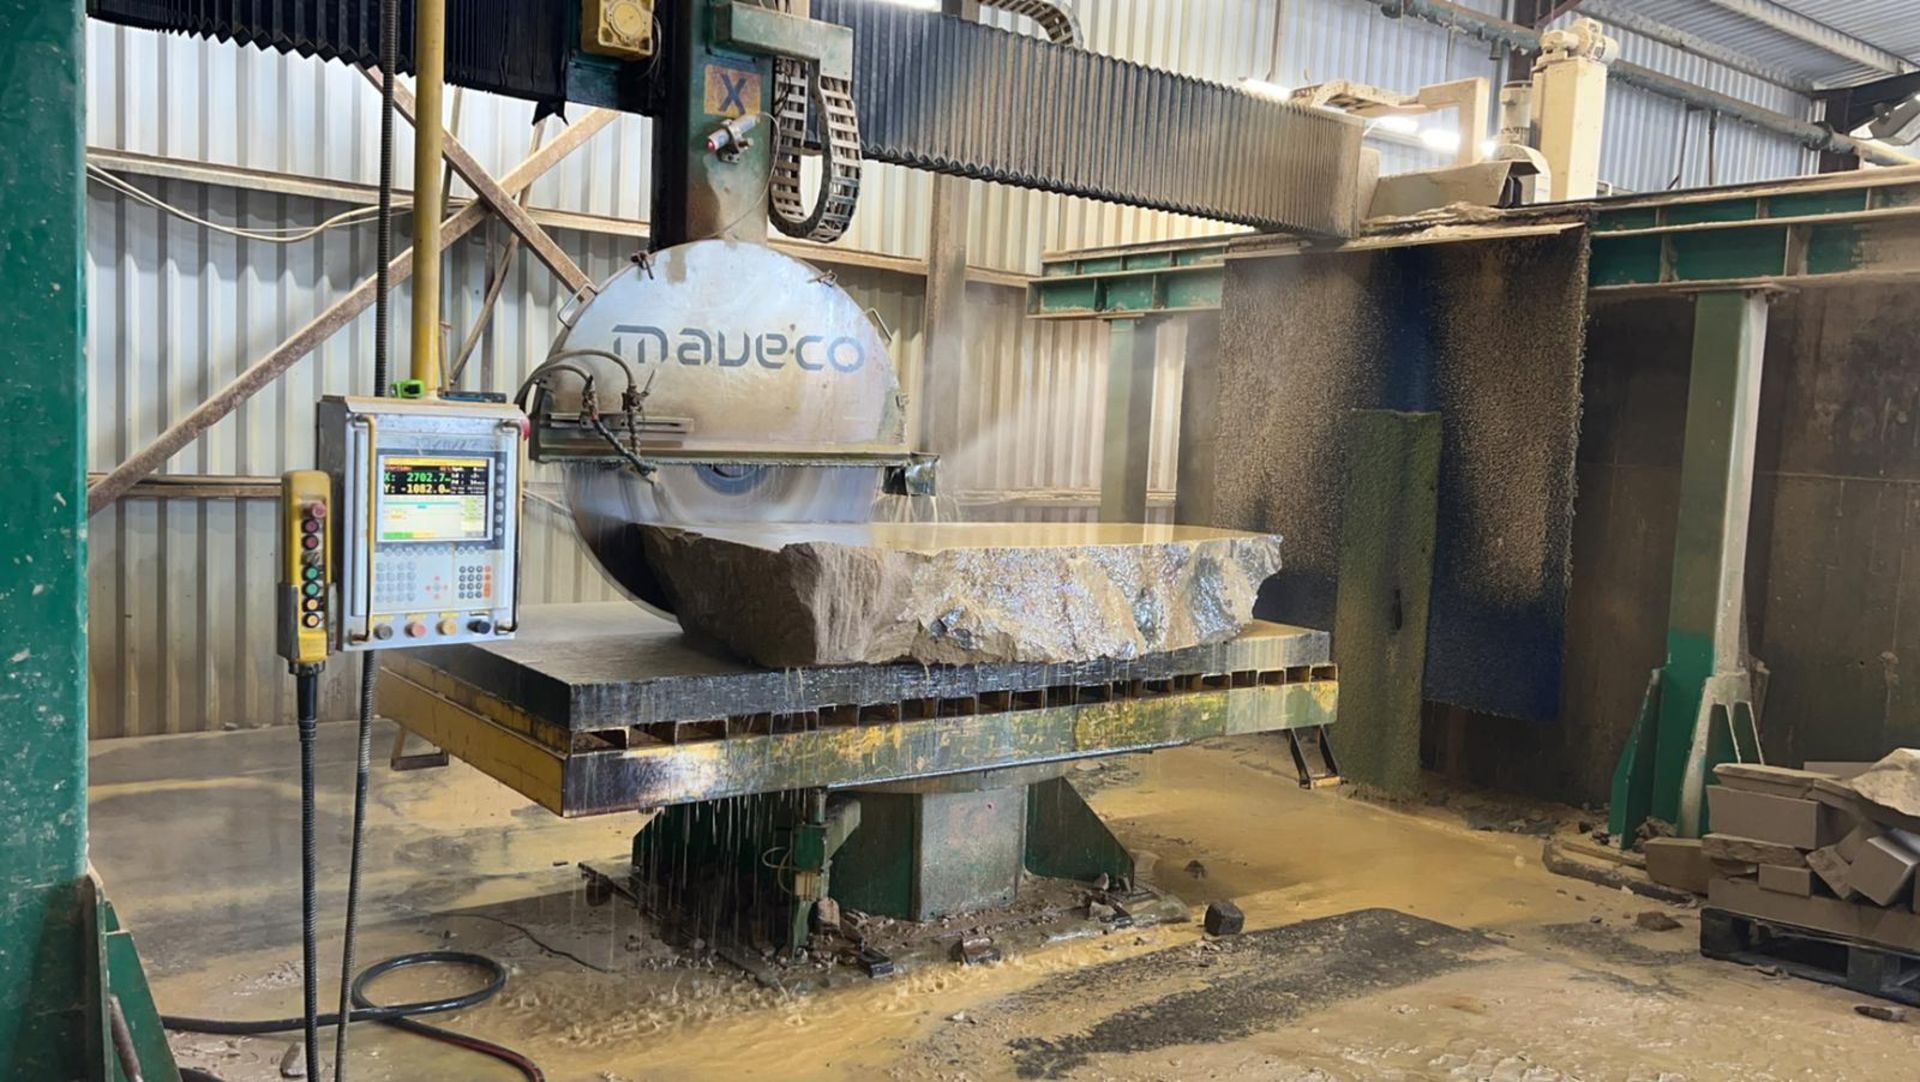 Maveco 1200 automatic Stone Saw Still in use every day Good condition  cuts like new well serviced - Image 4 of 6